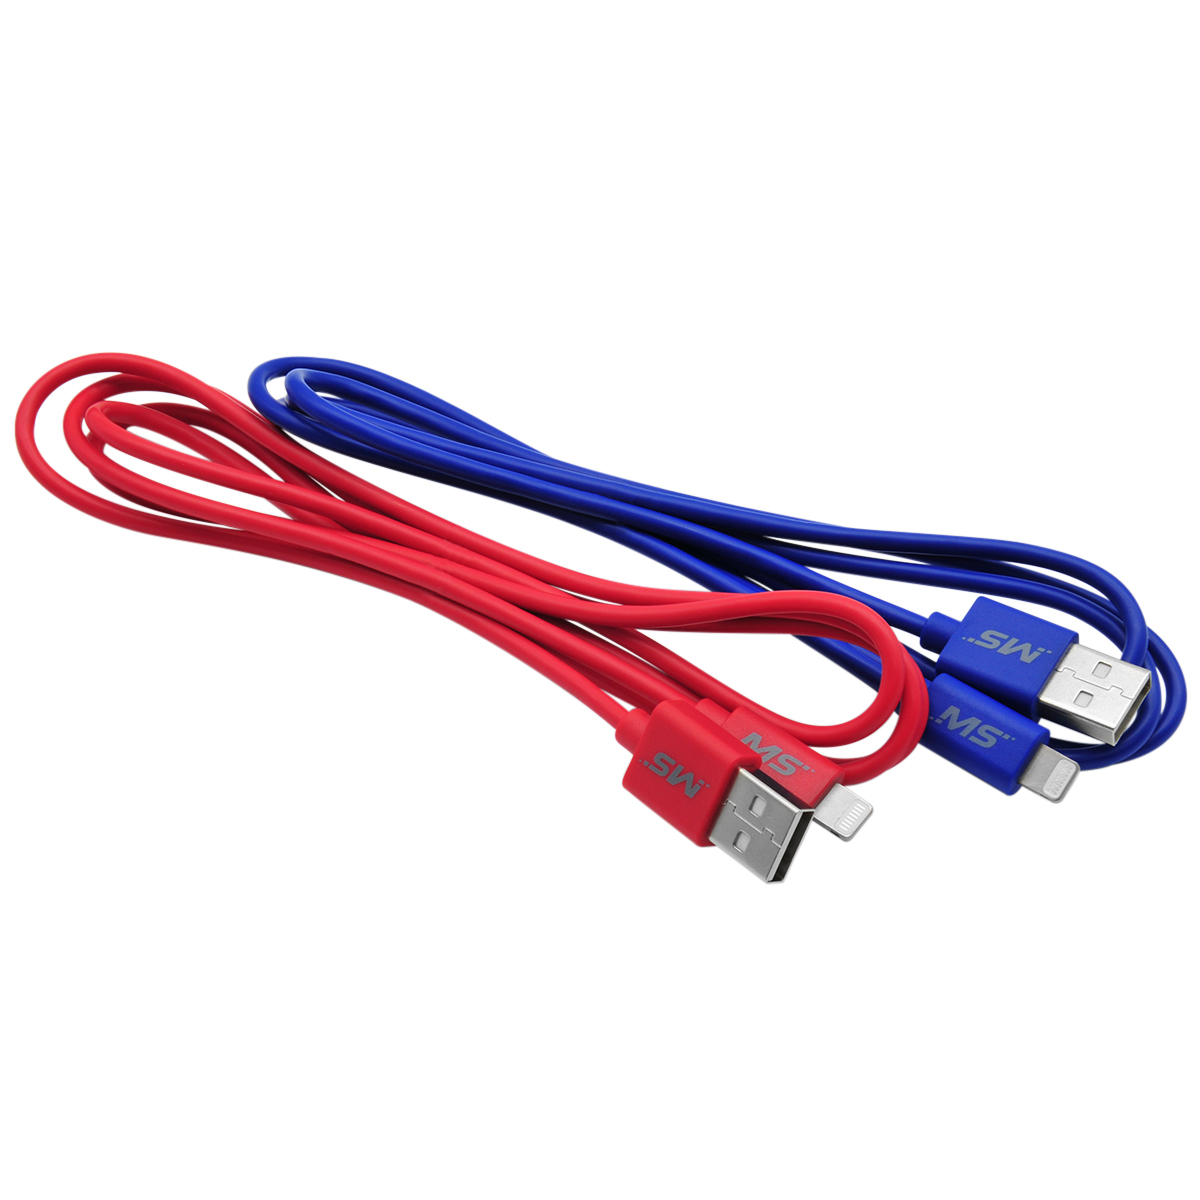 Ms Lightning(Compatible) To USB Cable 4Ft Cl